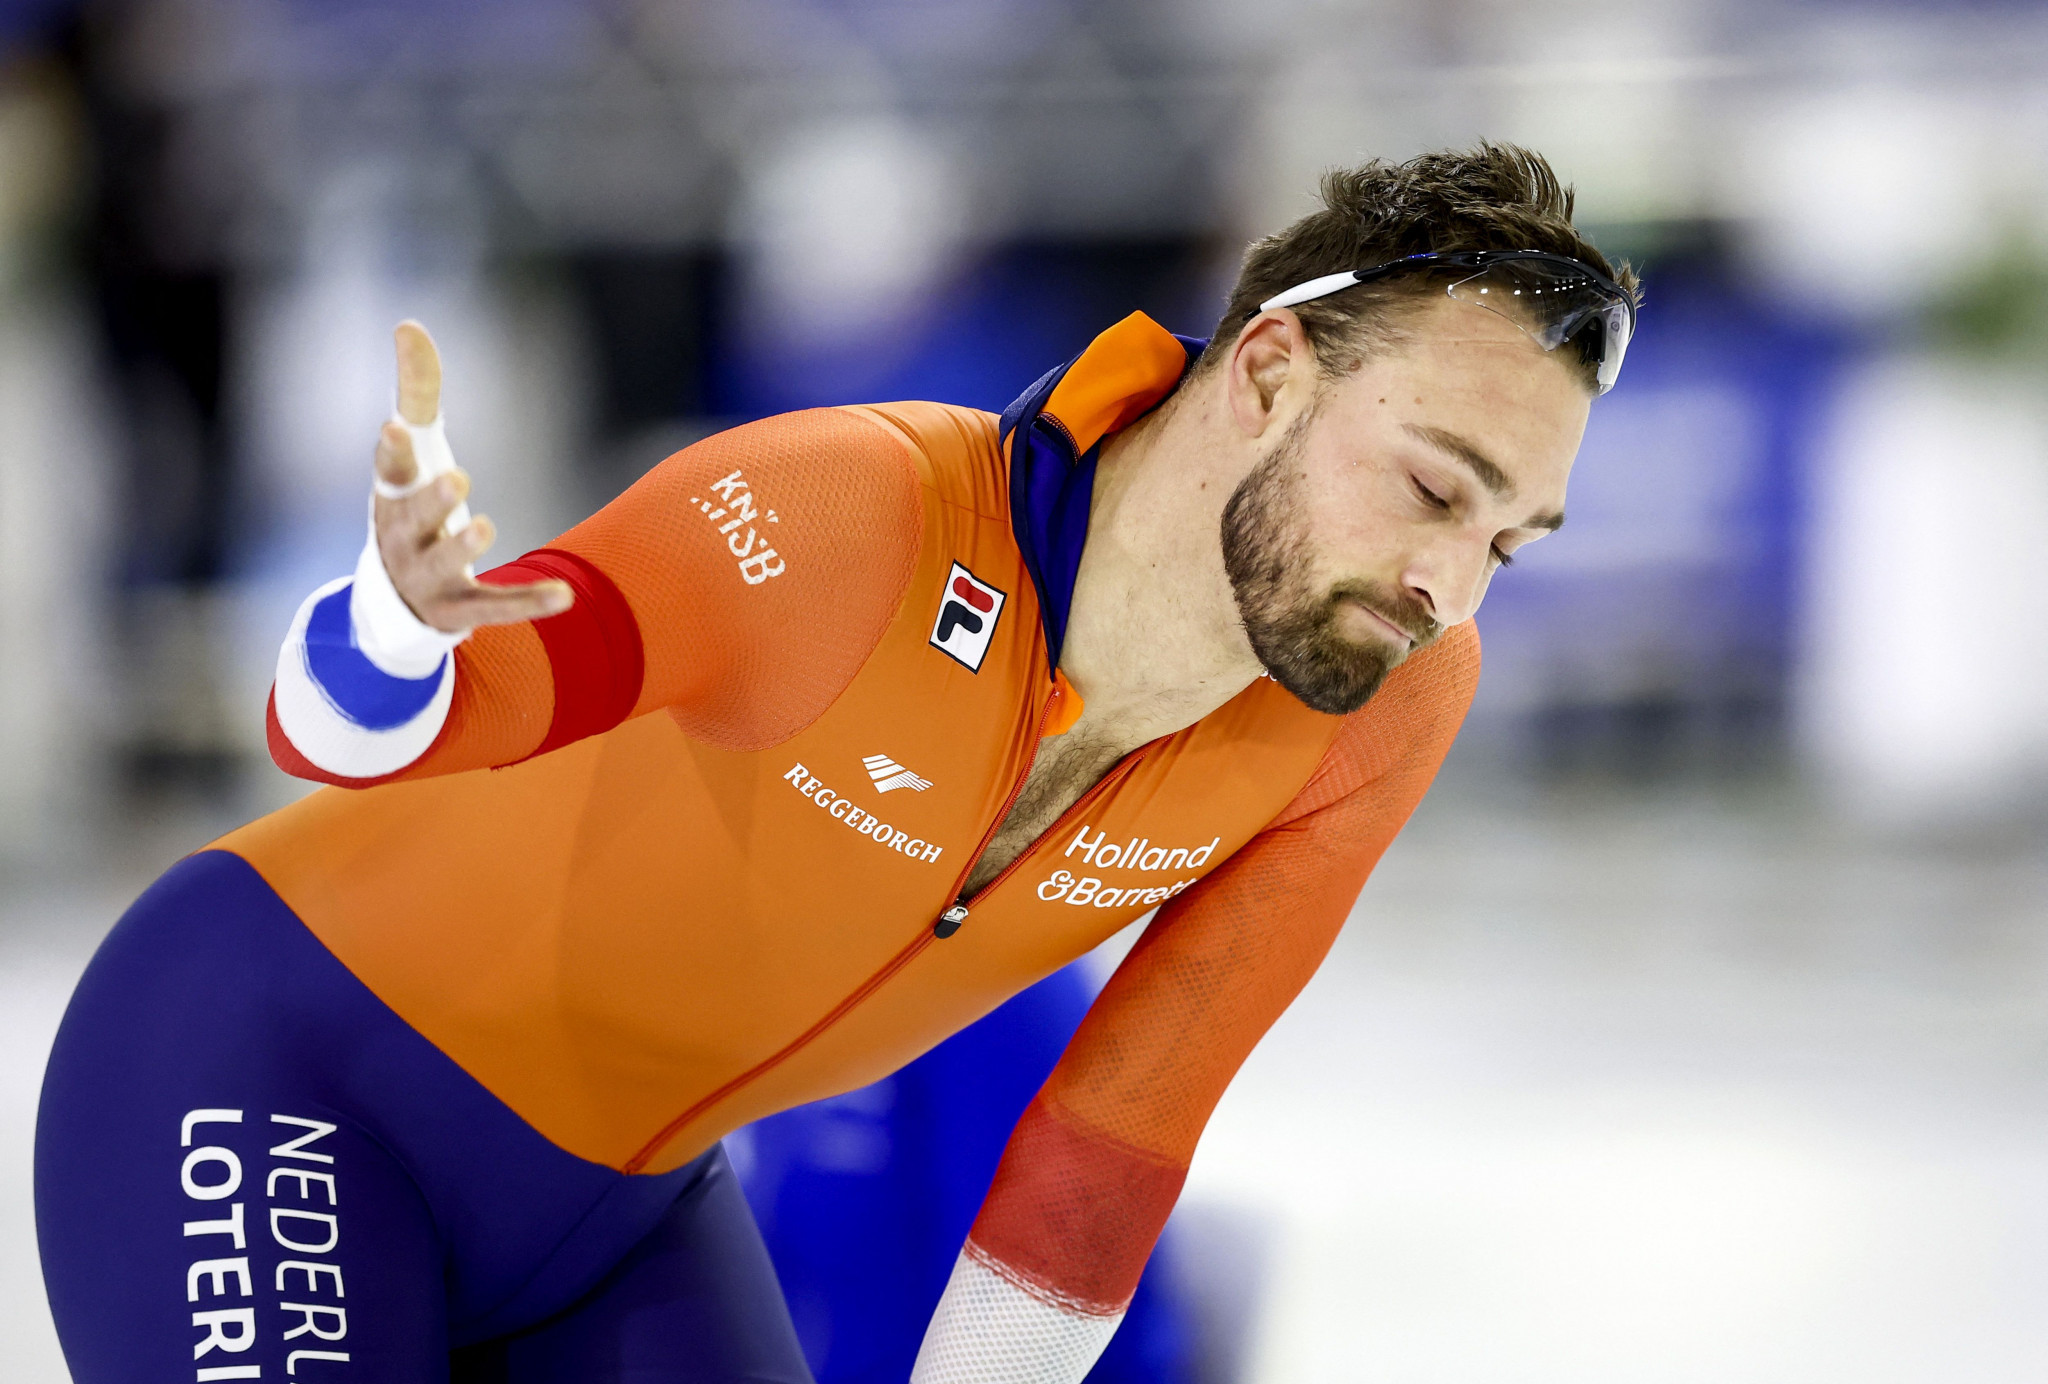 Dutch dominate again on last day of European Speed Skating Championships